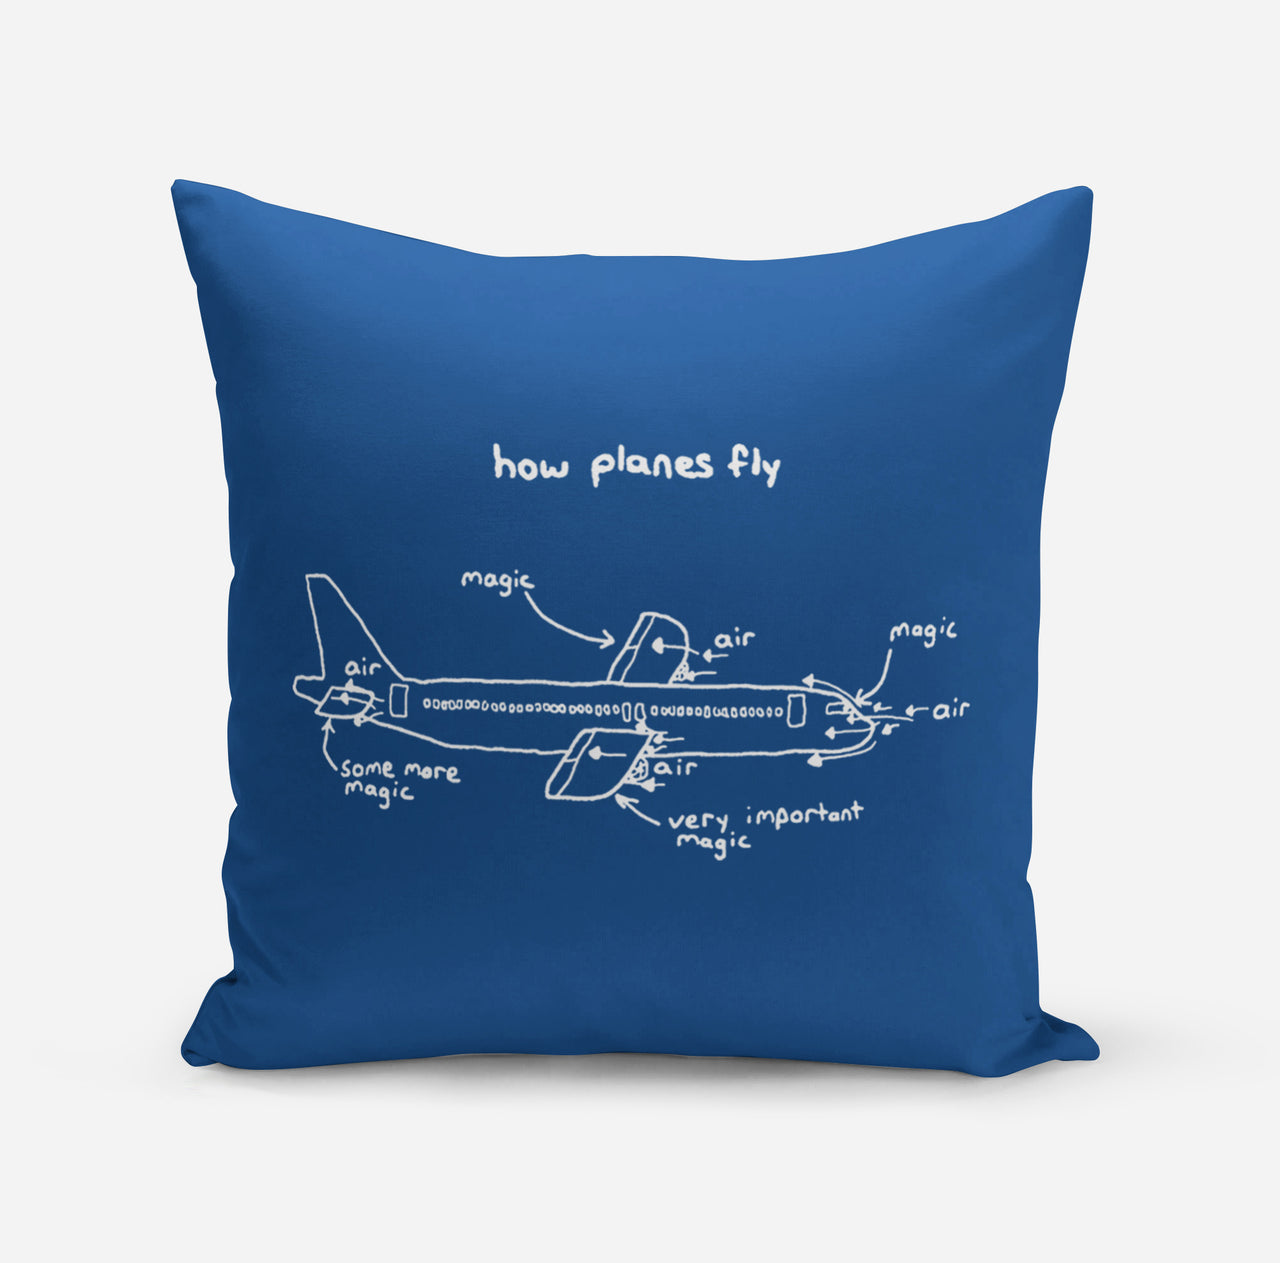 How Planes Fly Designed Pillows